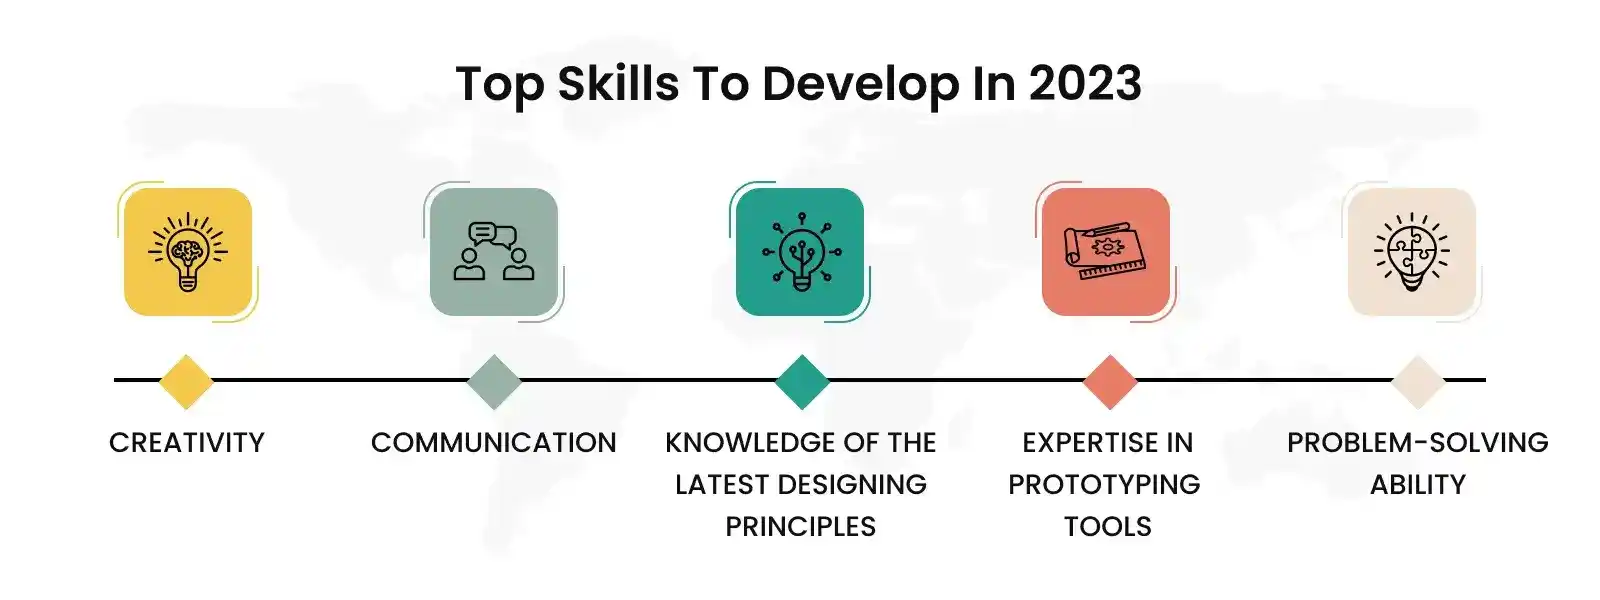 Top UI/UX Skills to Develop in 2023